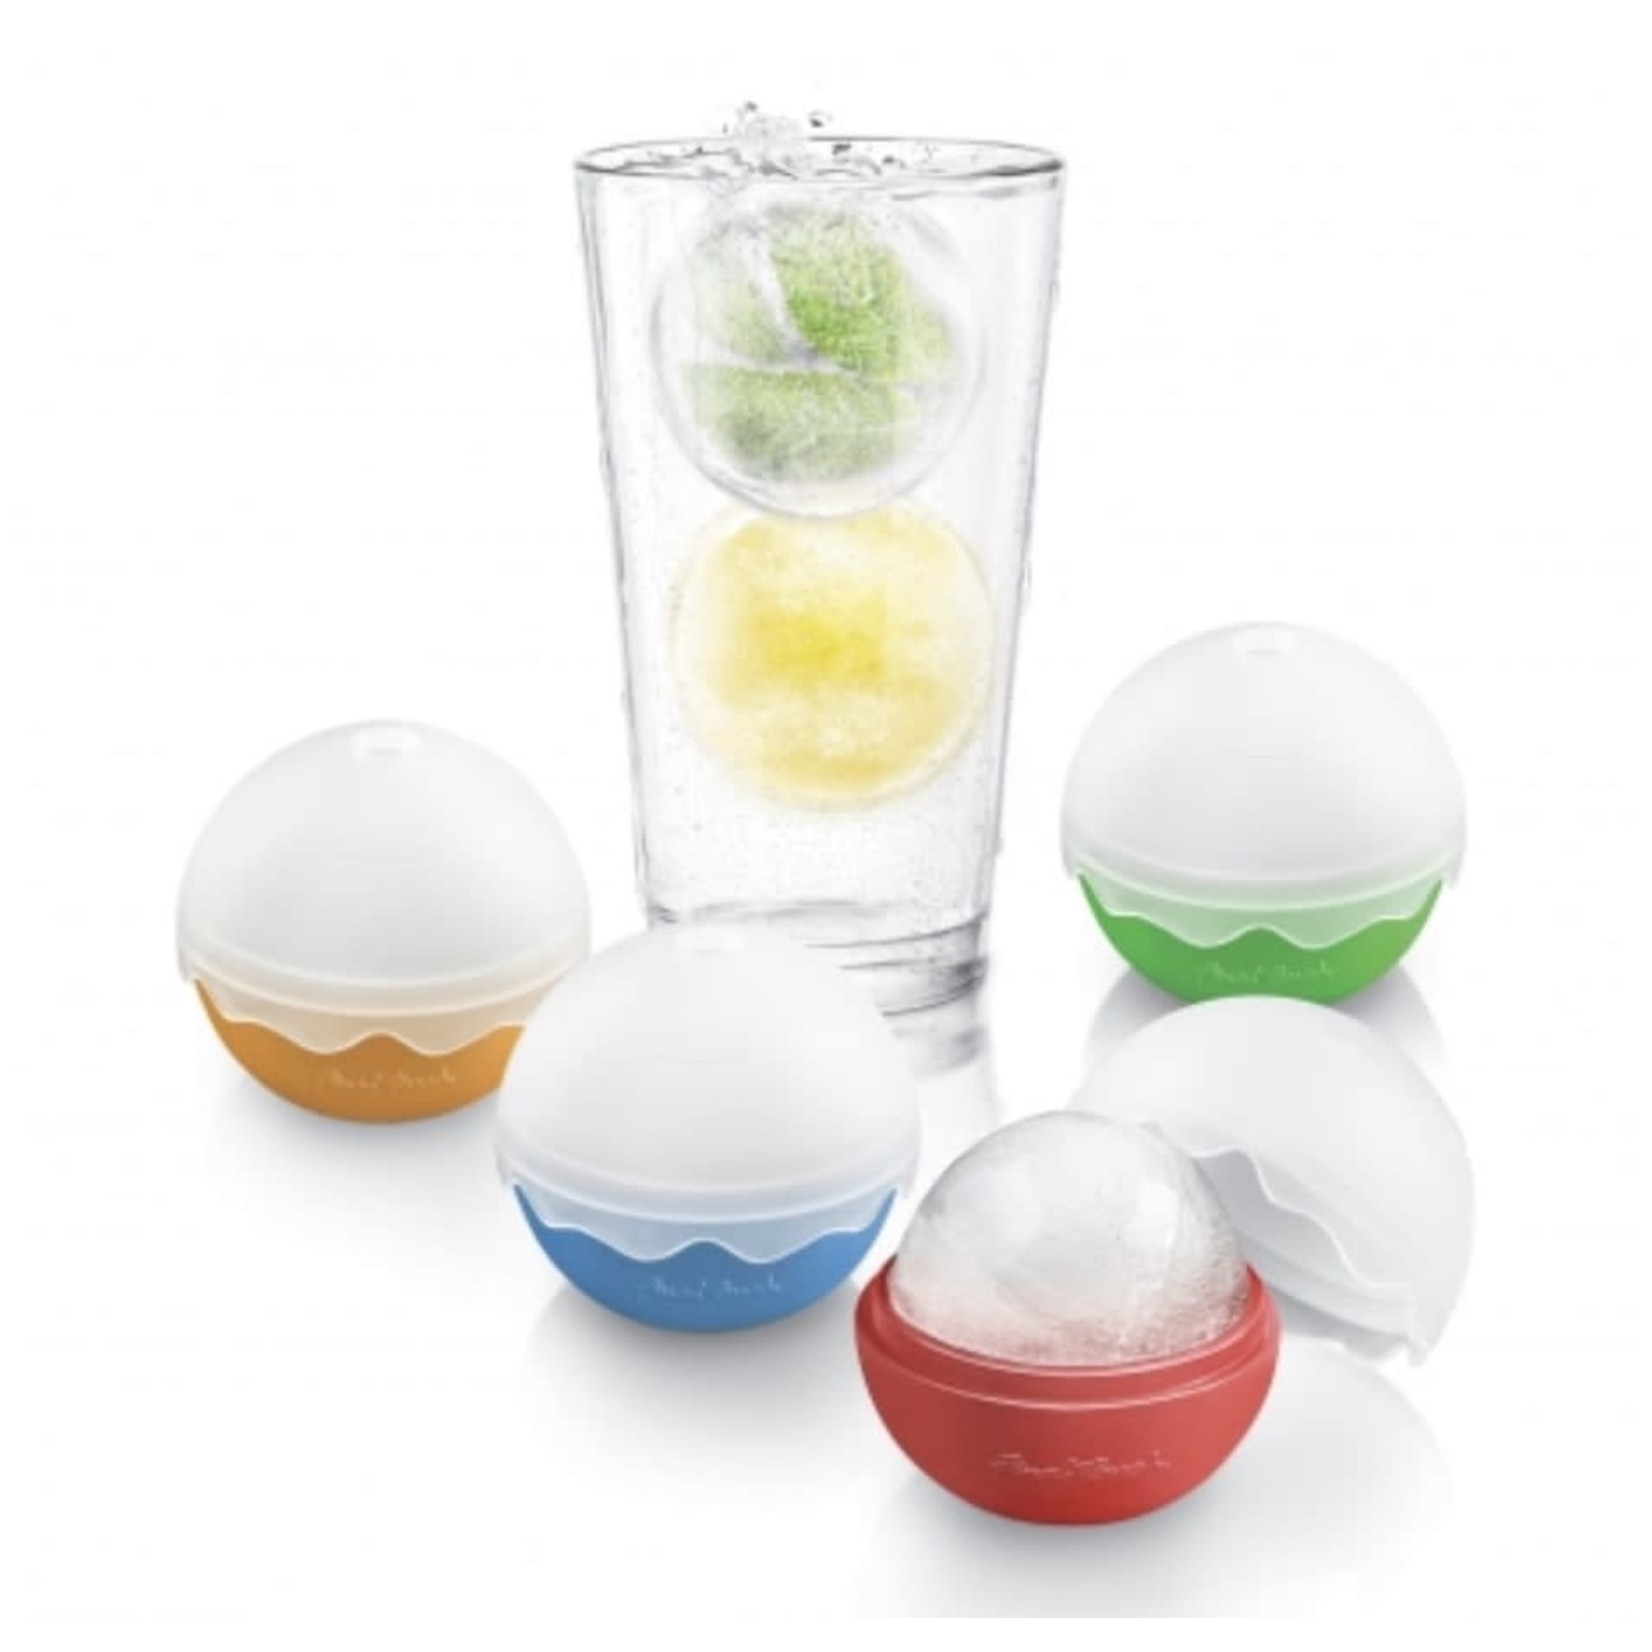 FINAL TOUCH FINAL TOUCH Silicone Ice Balls 4pk